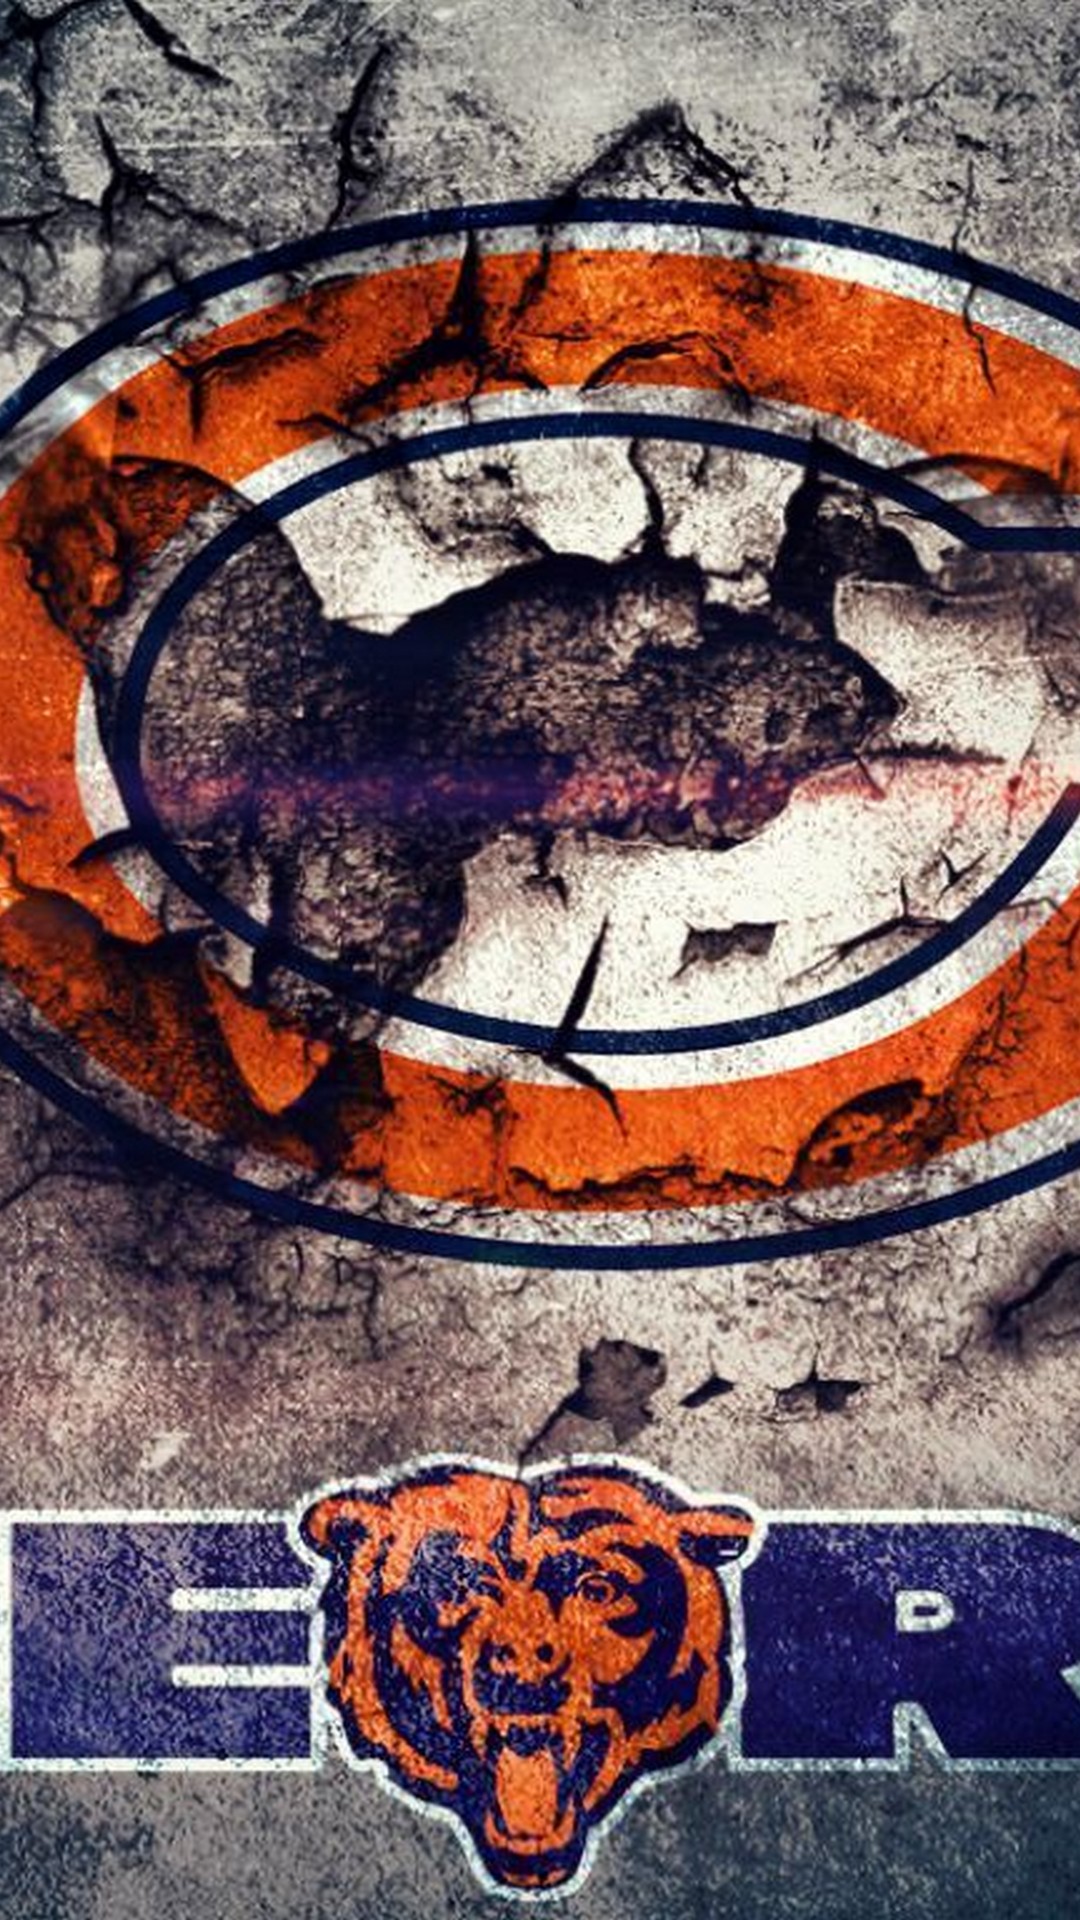 Chicago Bears iPhone Screen Lock Wallpaper With high-resolution 1080X1920 pixel. Download and set as wallpaper for Apple iPhone X, XS Max, XR, 8, 7, 6, SE, iPad, Android